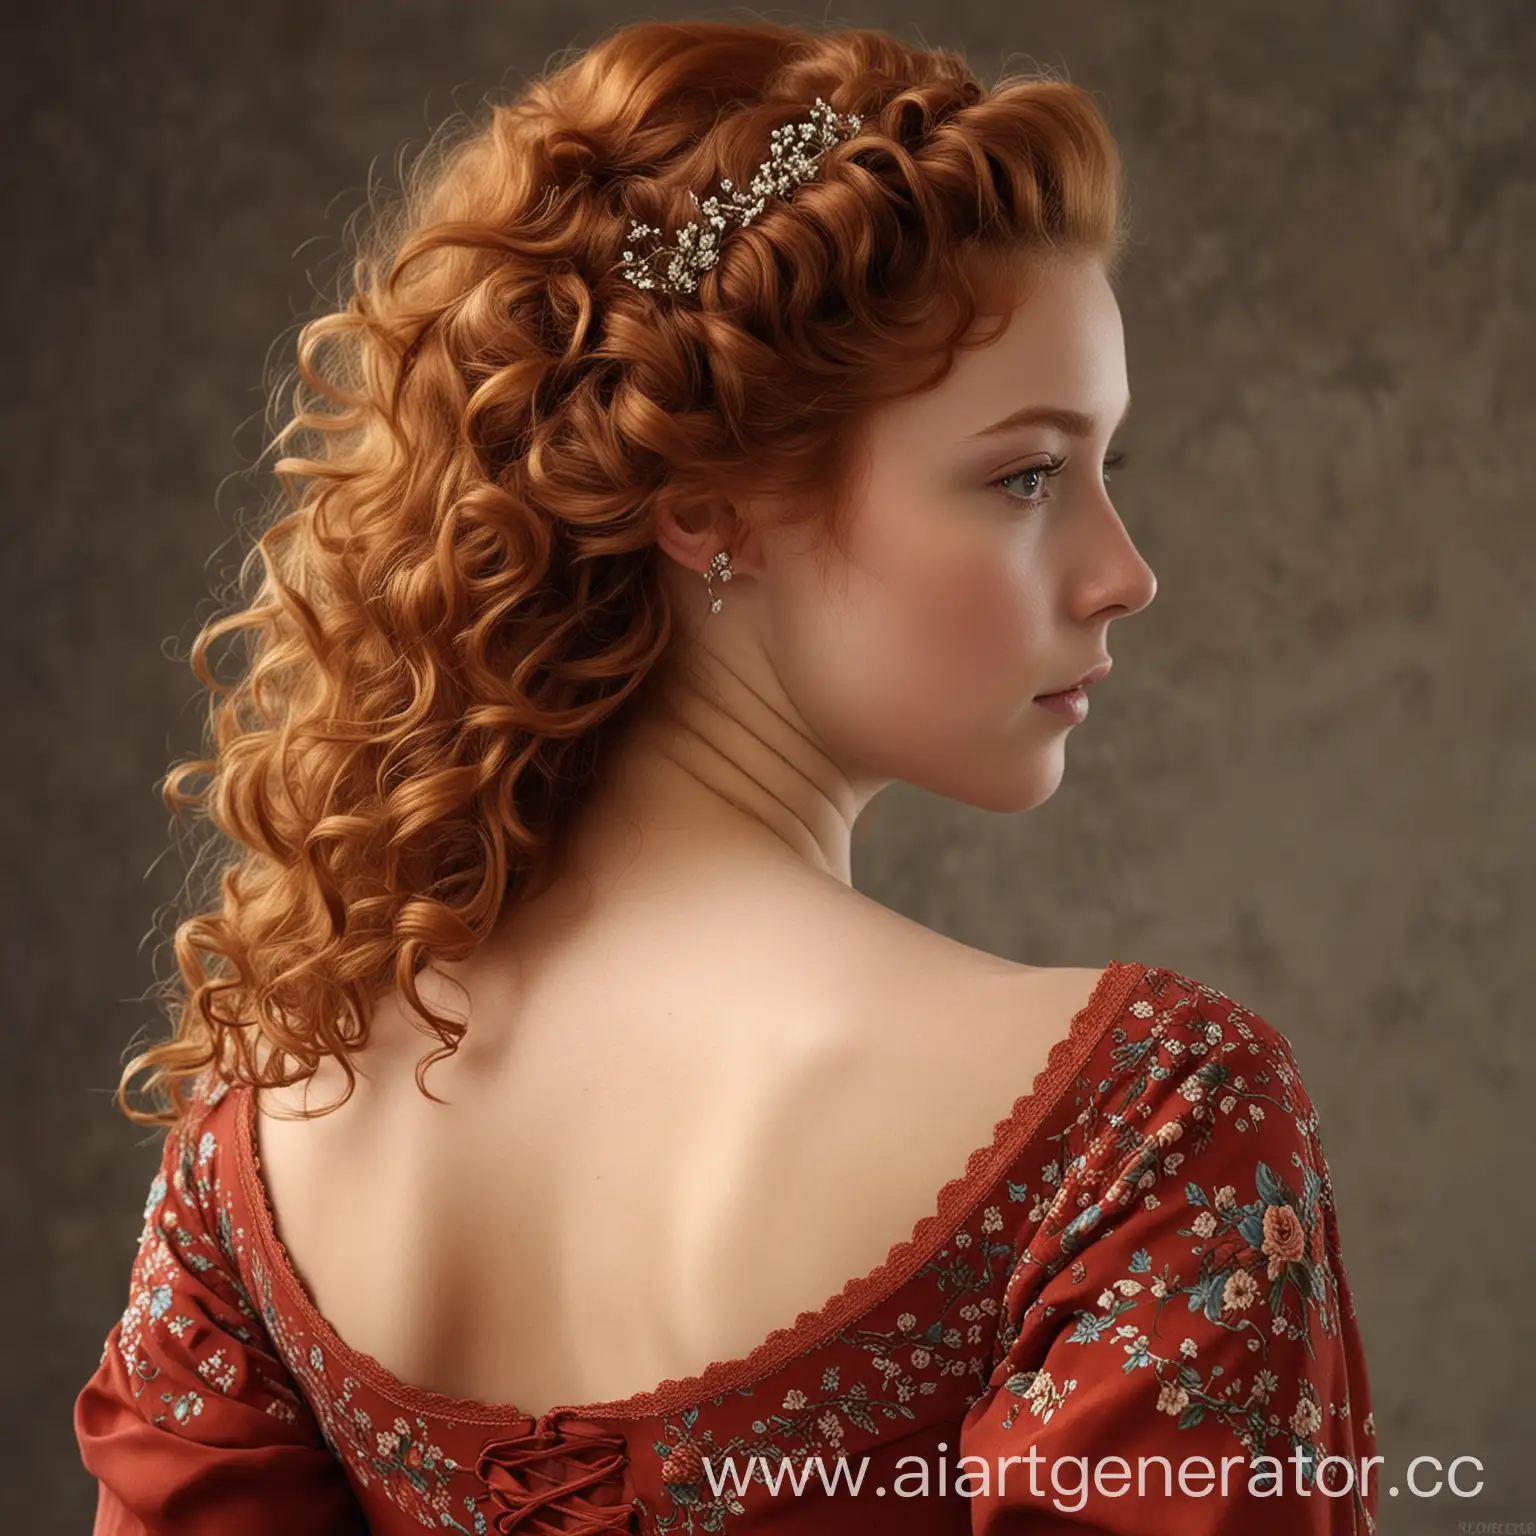 Medieval-Lady-in-Red-Floral-Dress-with-Auburn-Curls-Innocence-and-Elegance-Captured